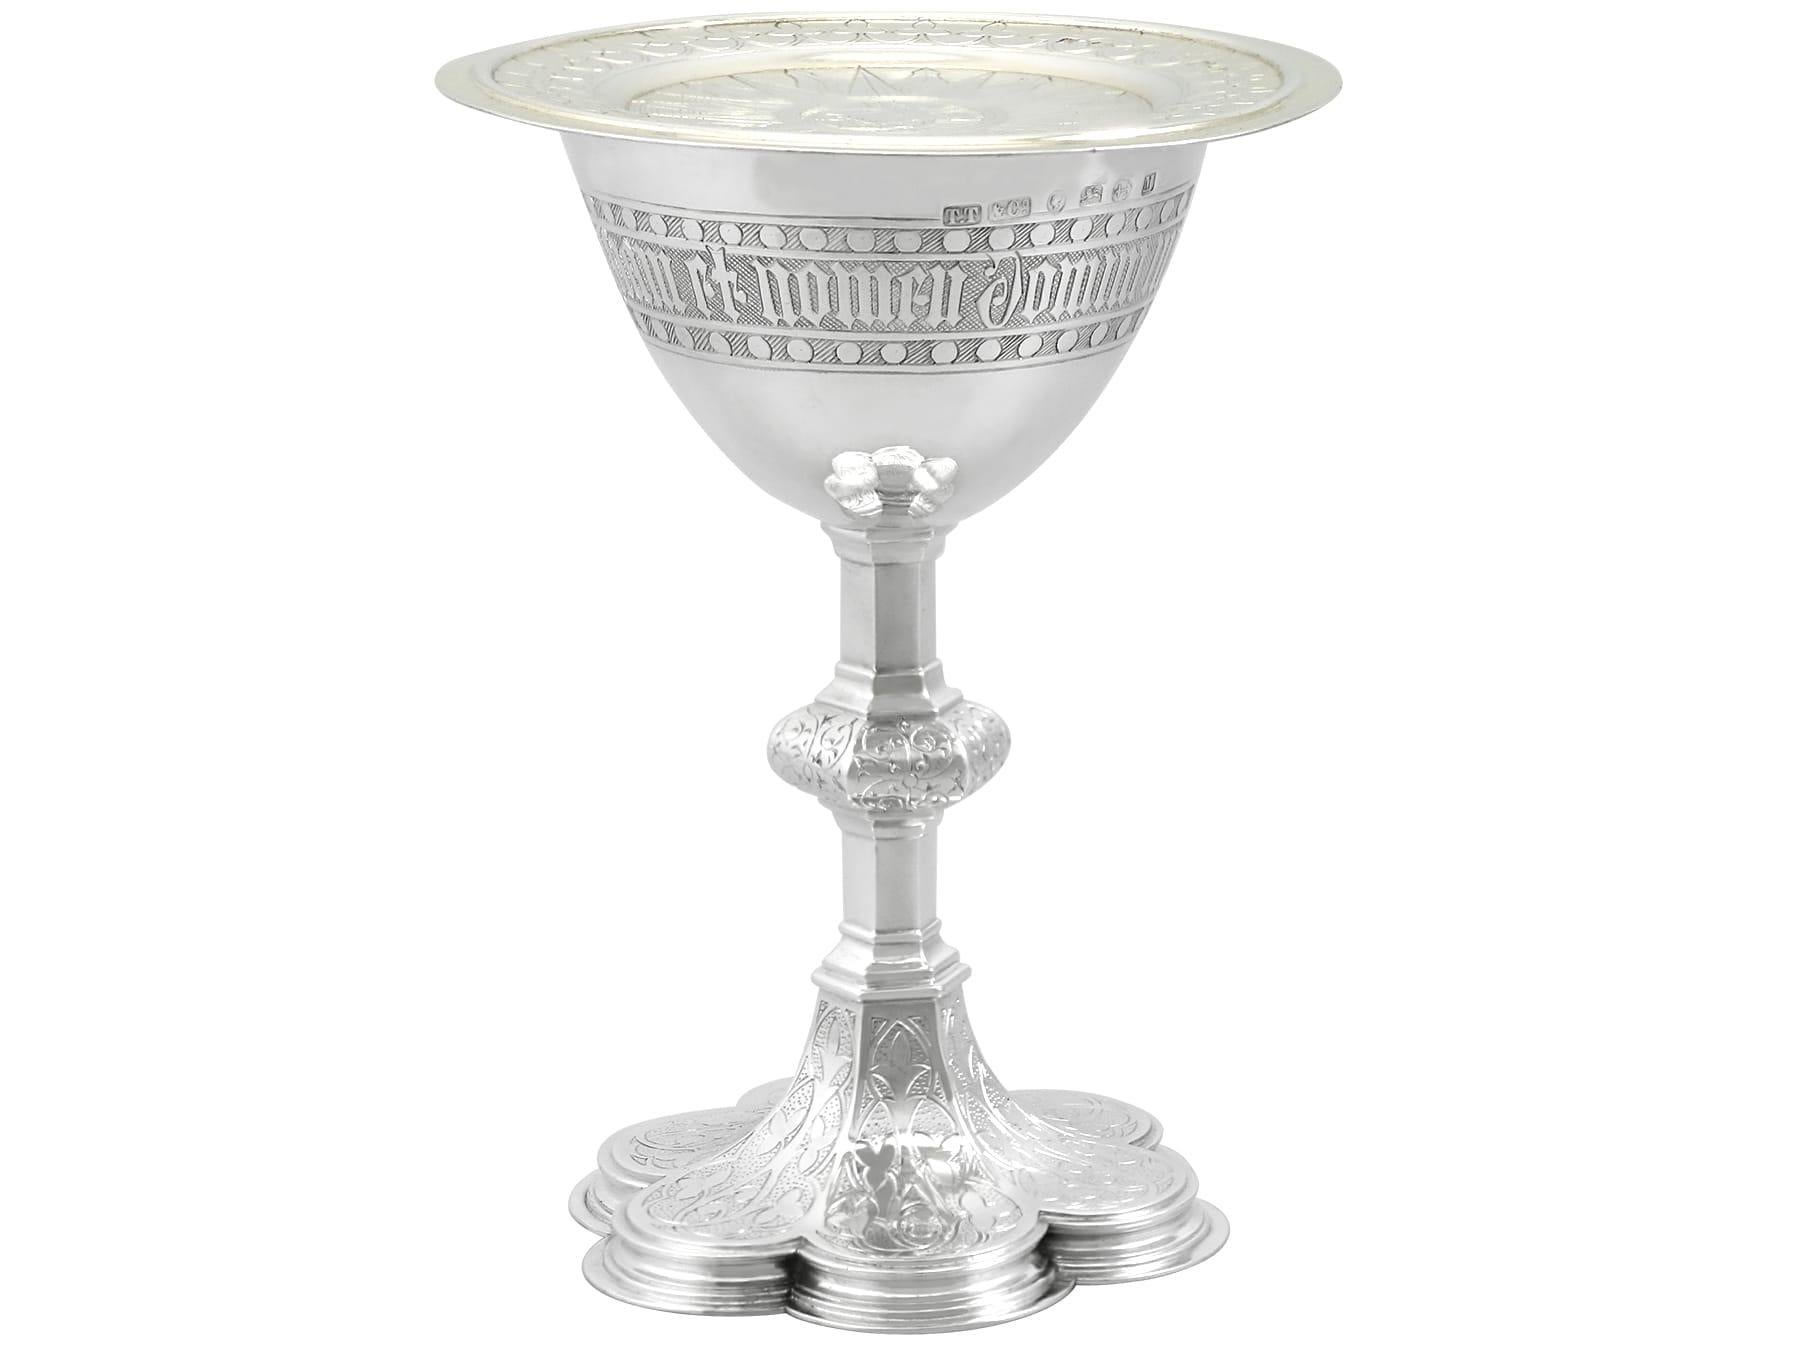 British Antique Victorian Sterling Silver Communion Chalice and Paten For Sale